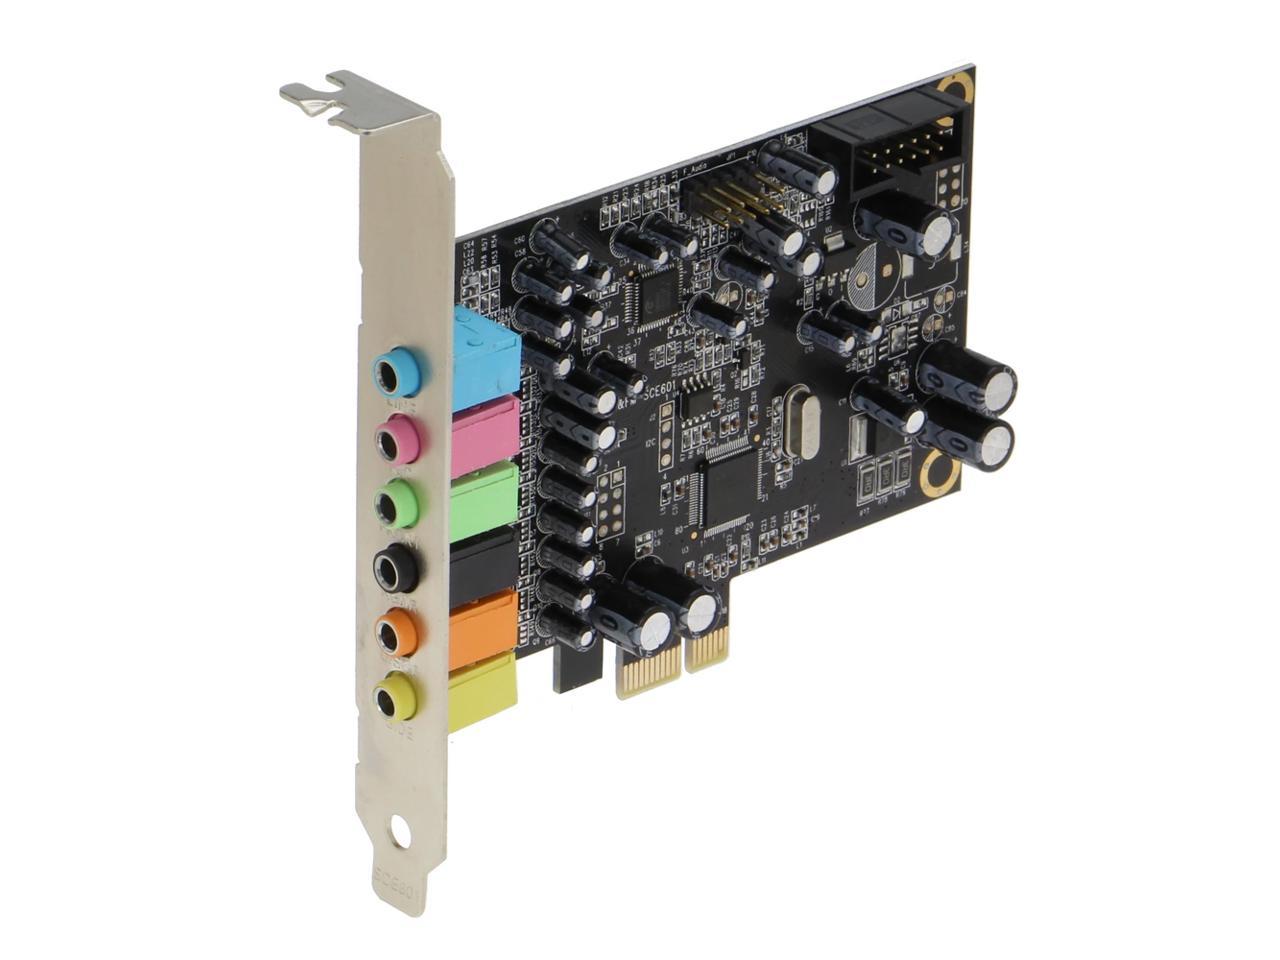 fg-ps4c-a1-01-st01 sound card motherboard requirements